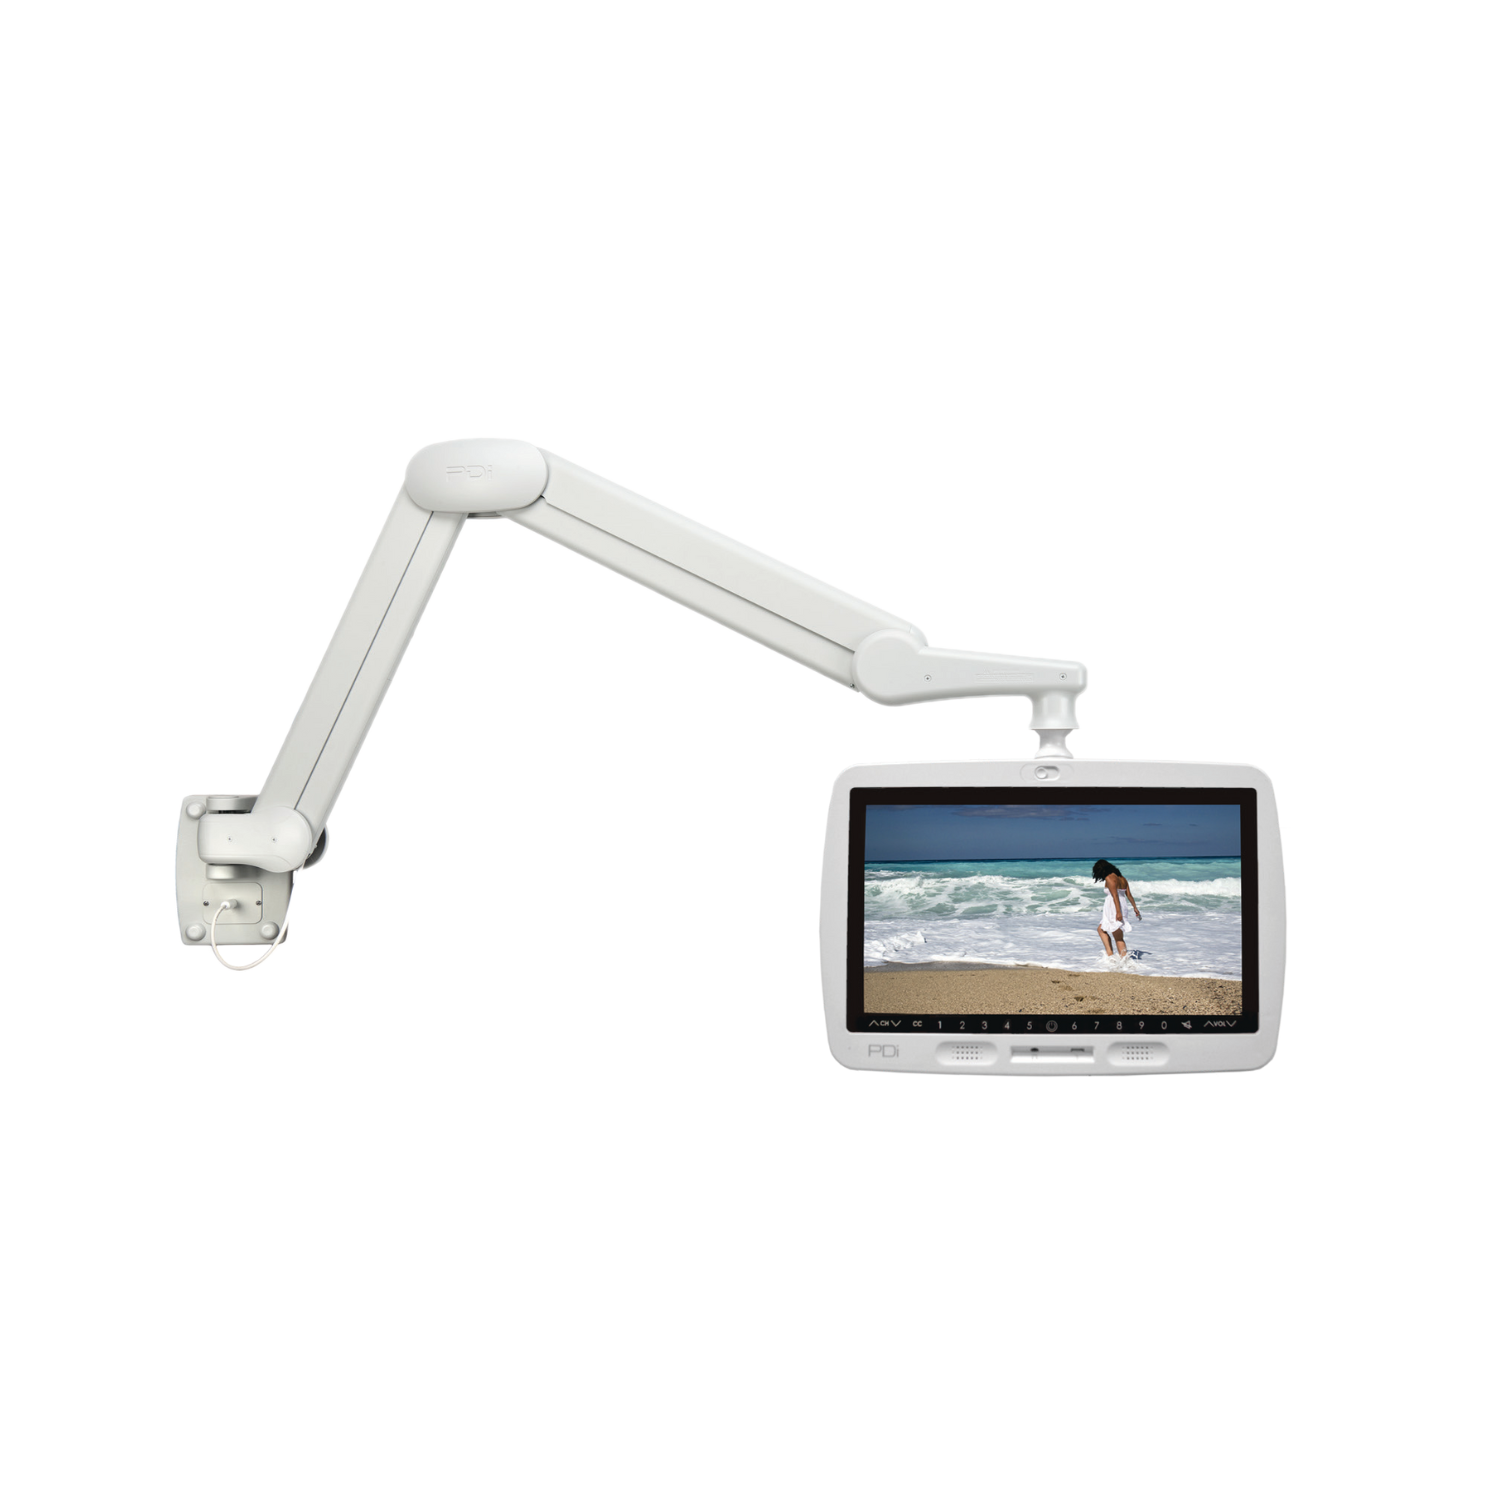 Cream PDi 1400 Series Support Arms designed for personal patient entertainment